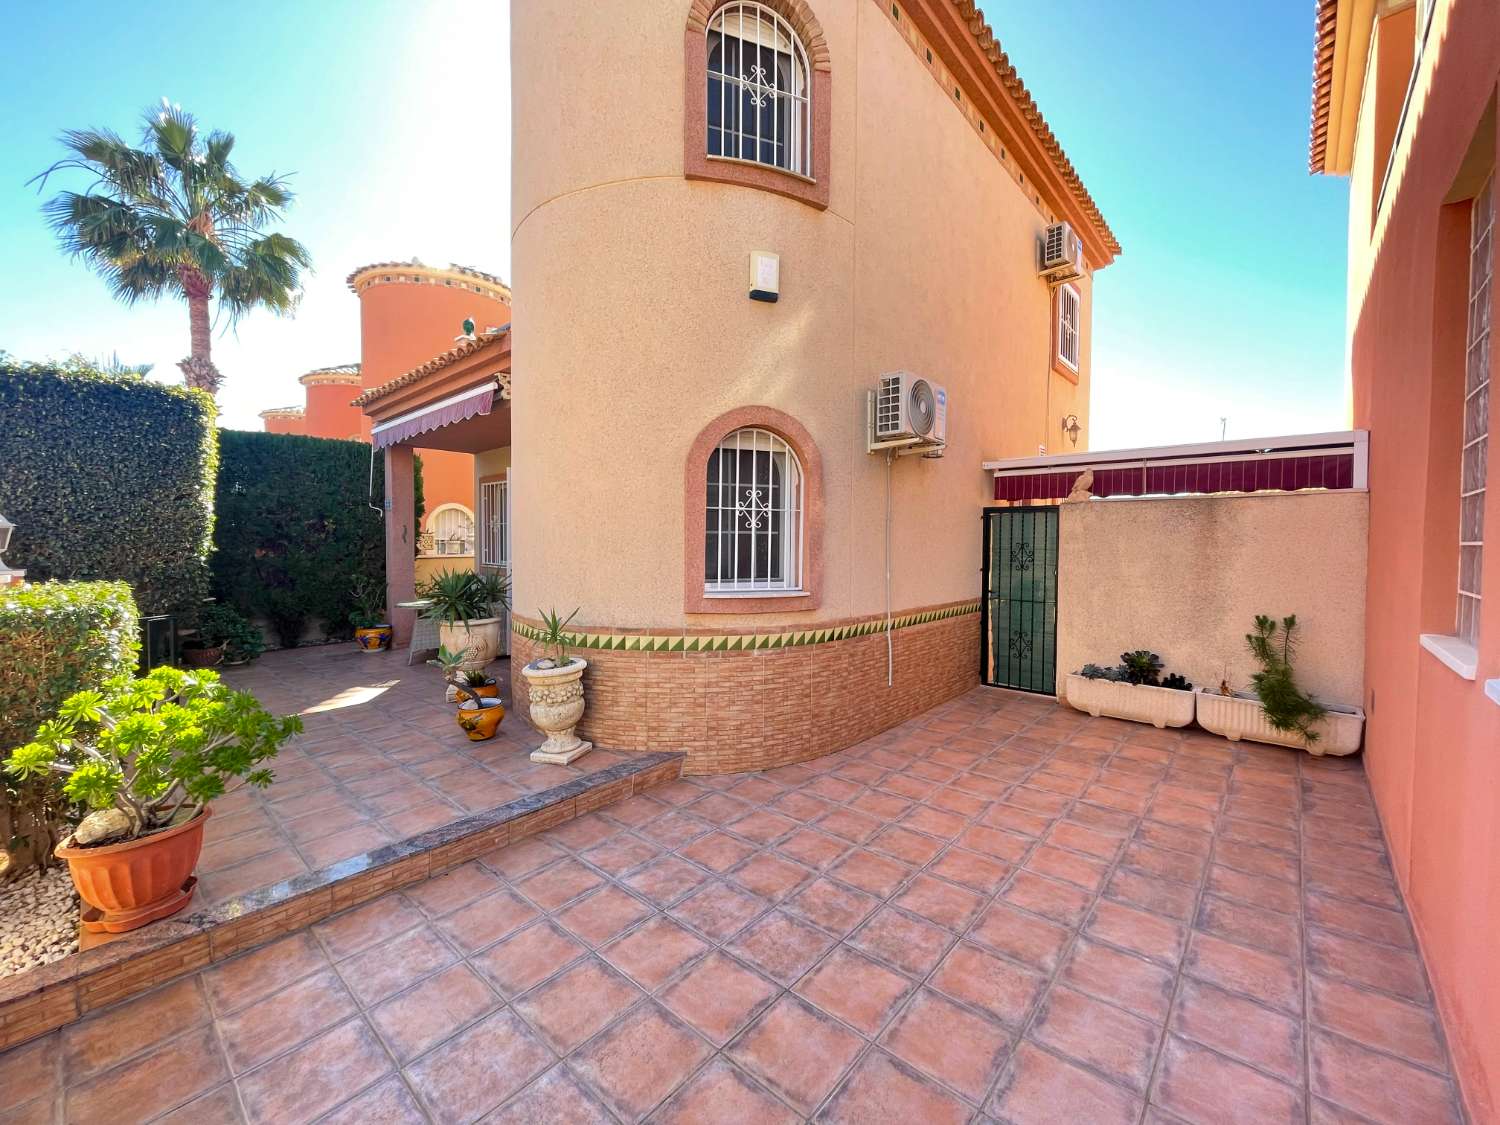 Beautiful detached villa with 3 bedrooms and 2 bathrooms with a private pool.